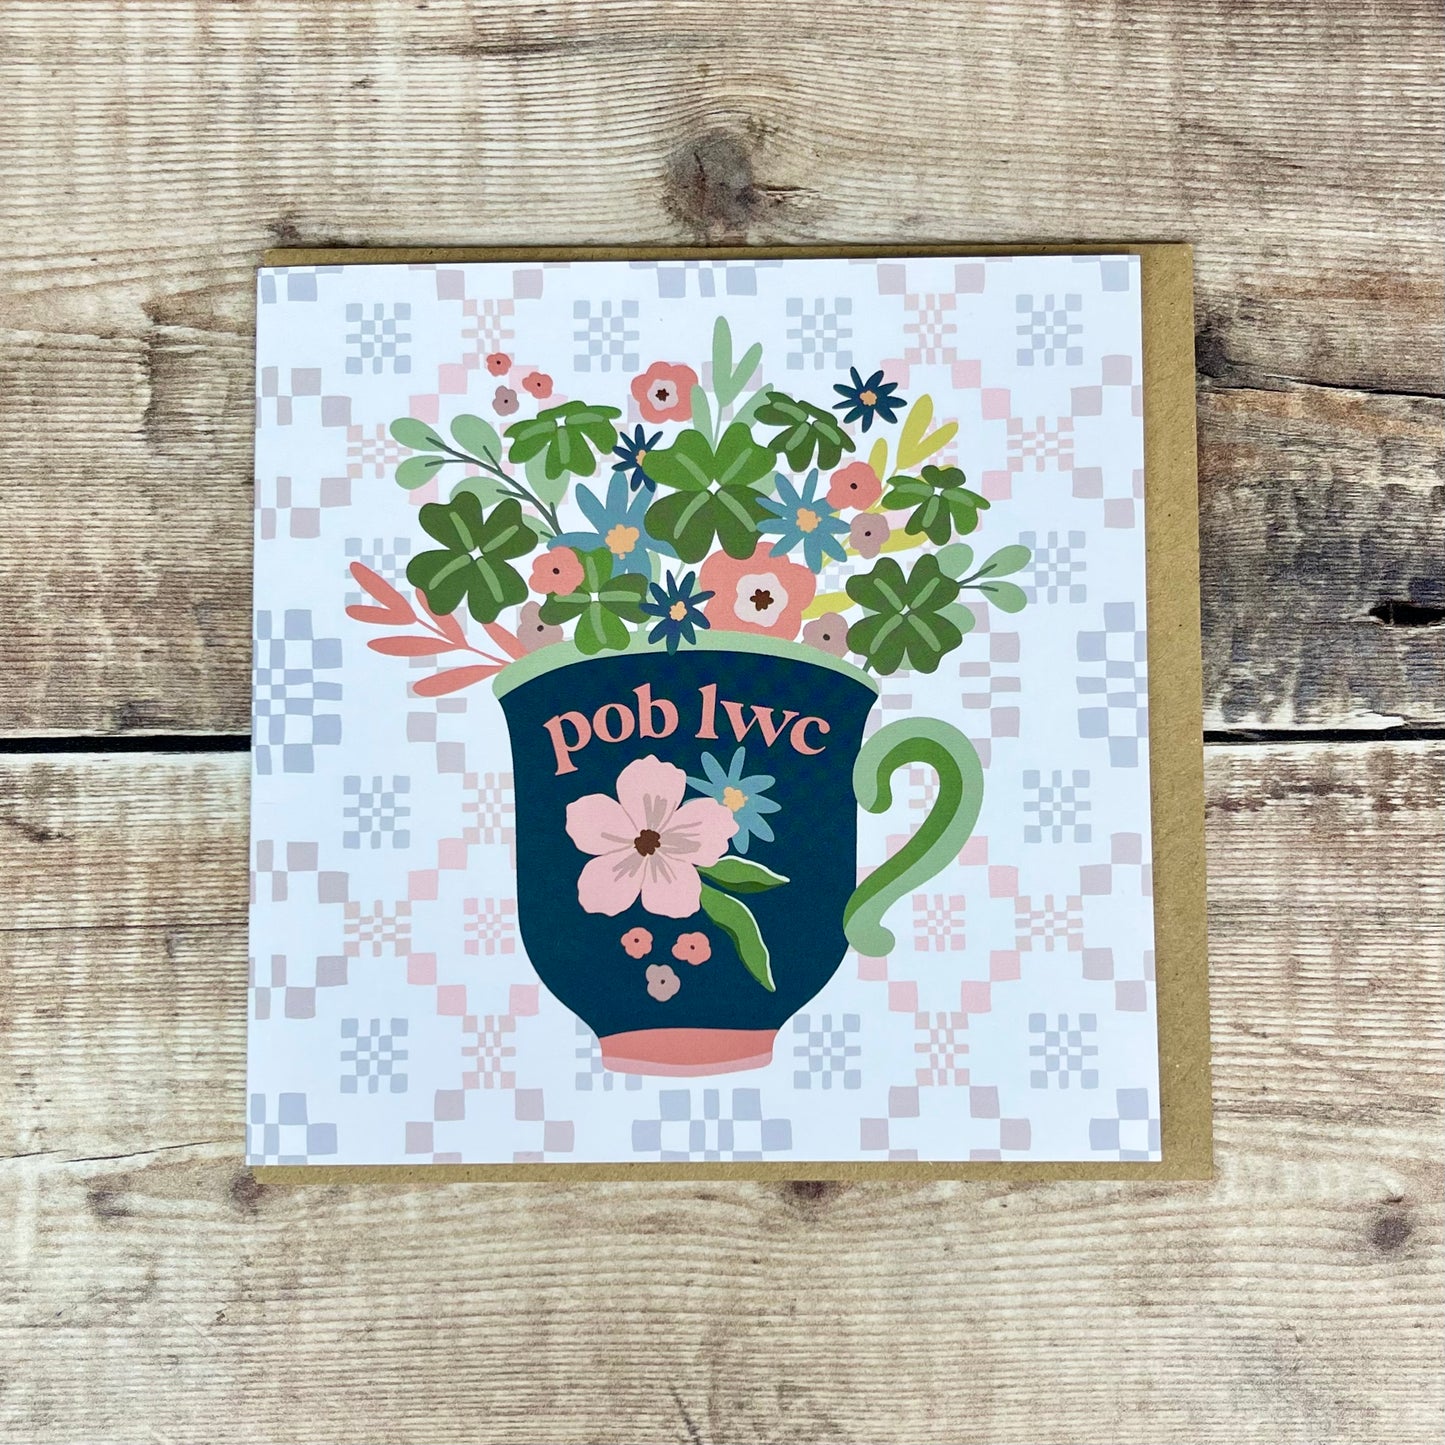 Cup of 'Pob Lwc' Card